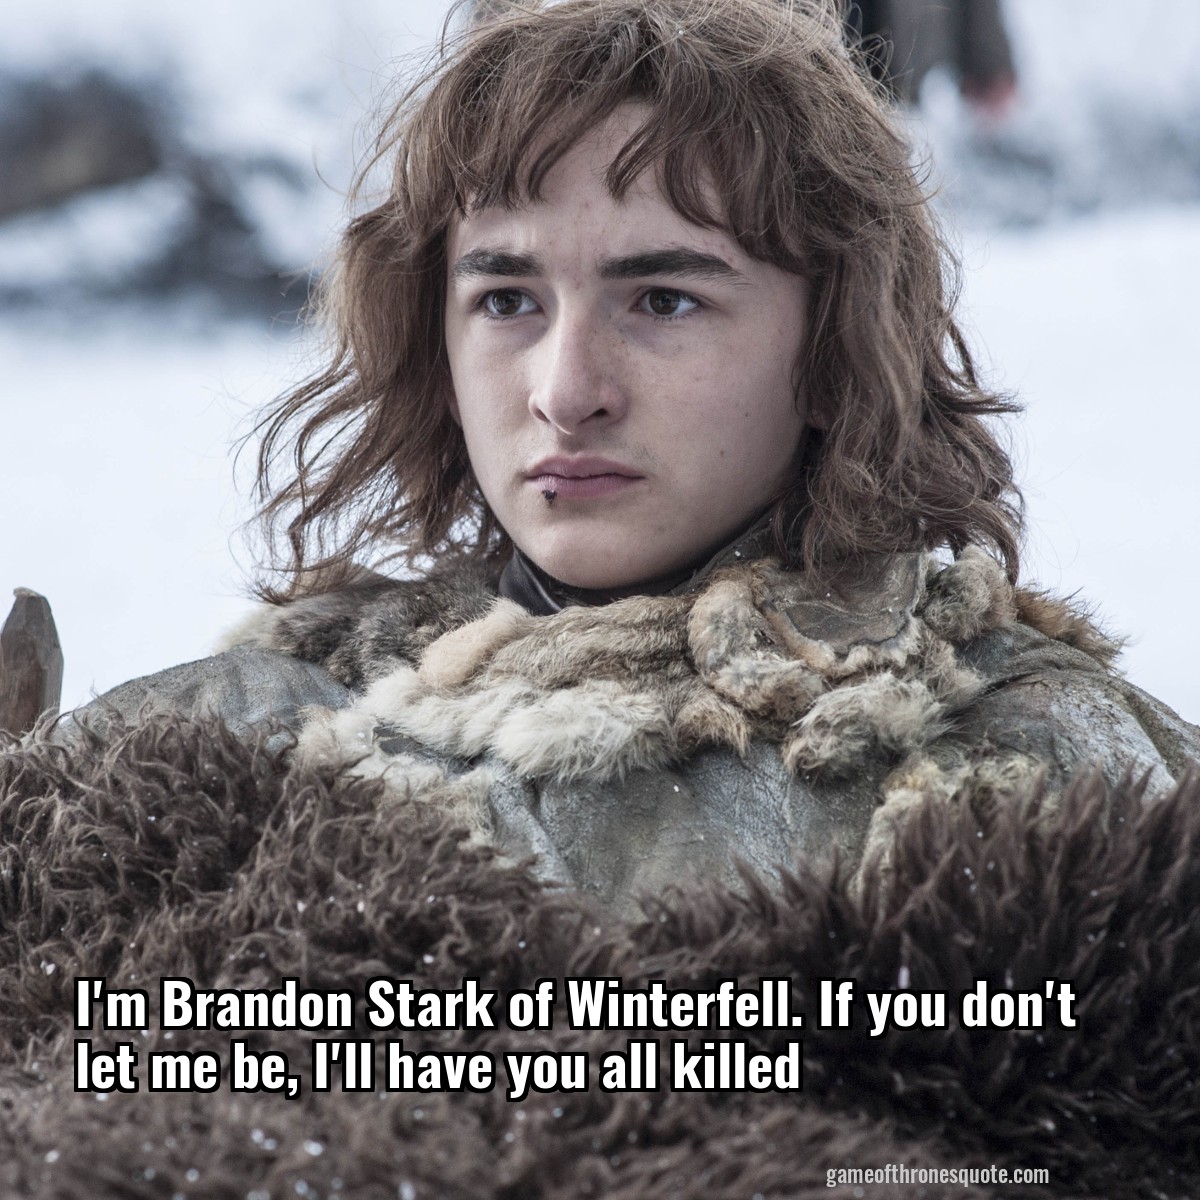 I'm Brandon Stark of Winterfell. If you don't let me be, I'll have you all killed